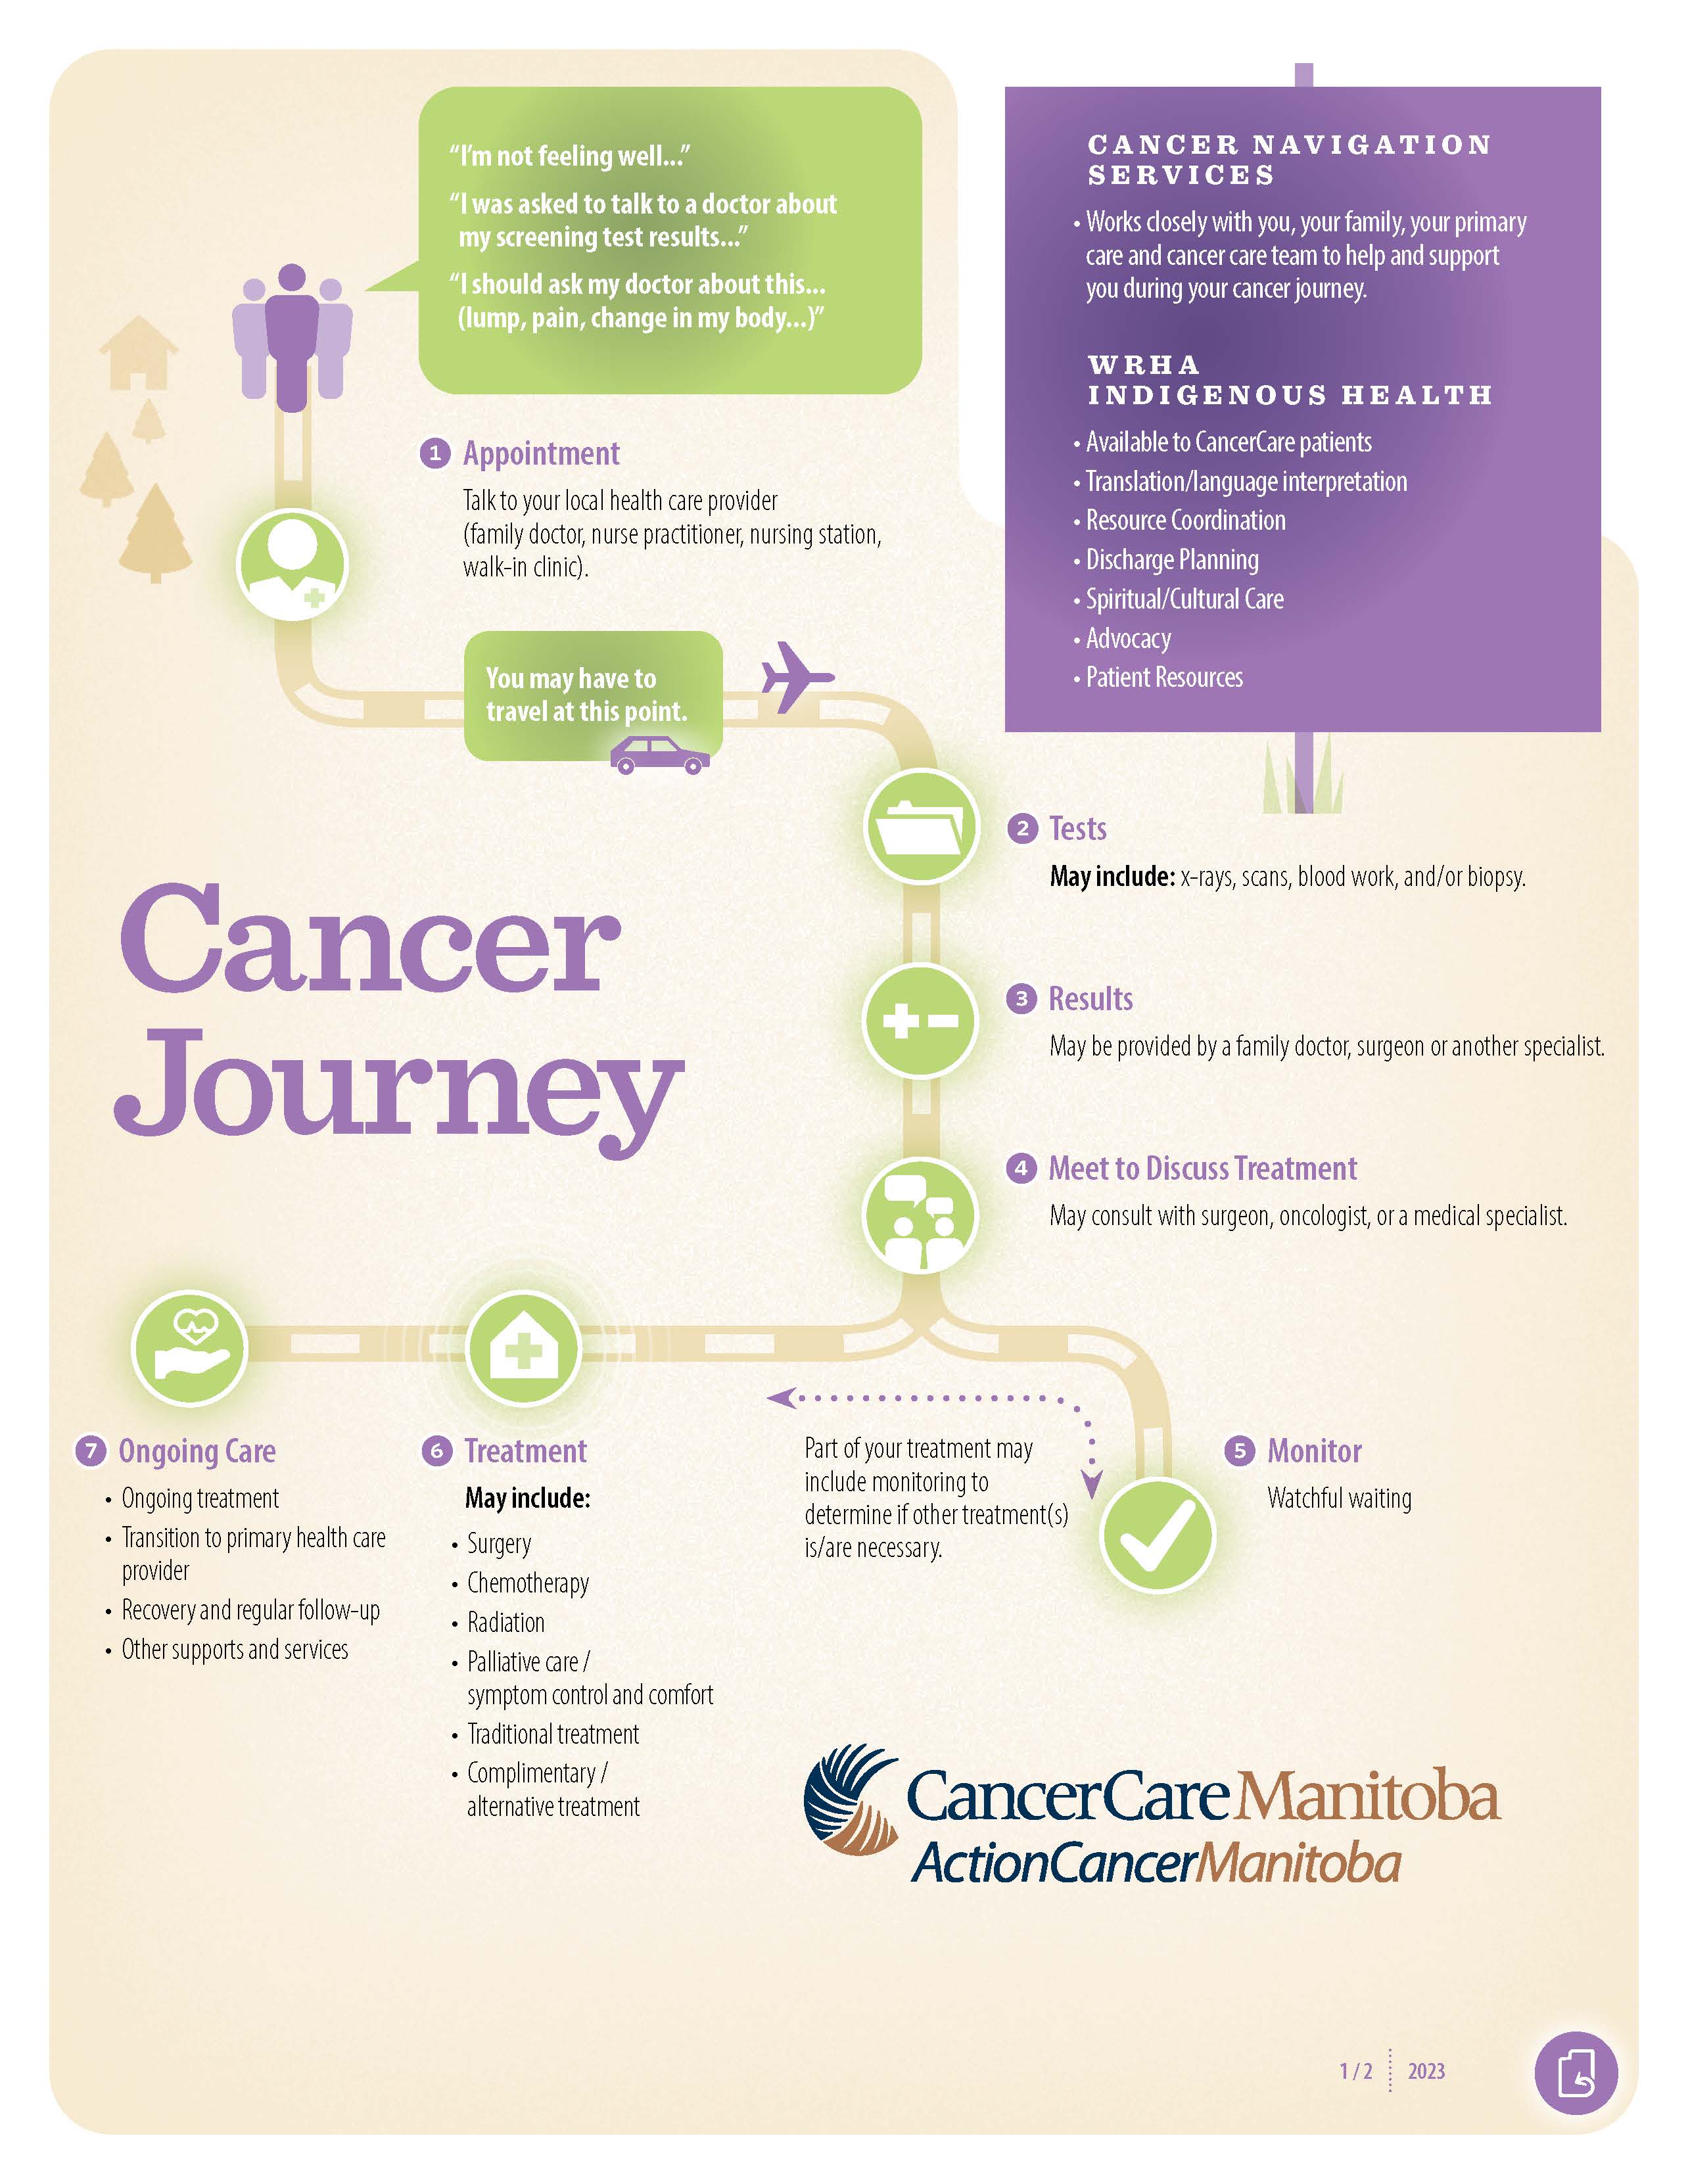 Infographic of the General Cancer Journey Patient Pathway (c) CancerCare Manitoba